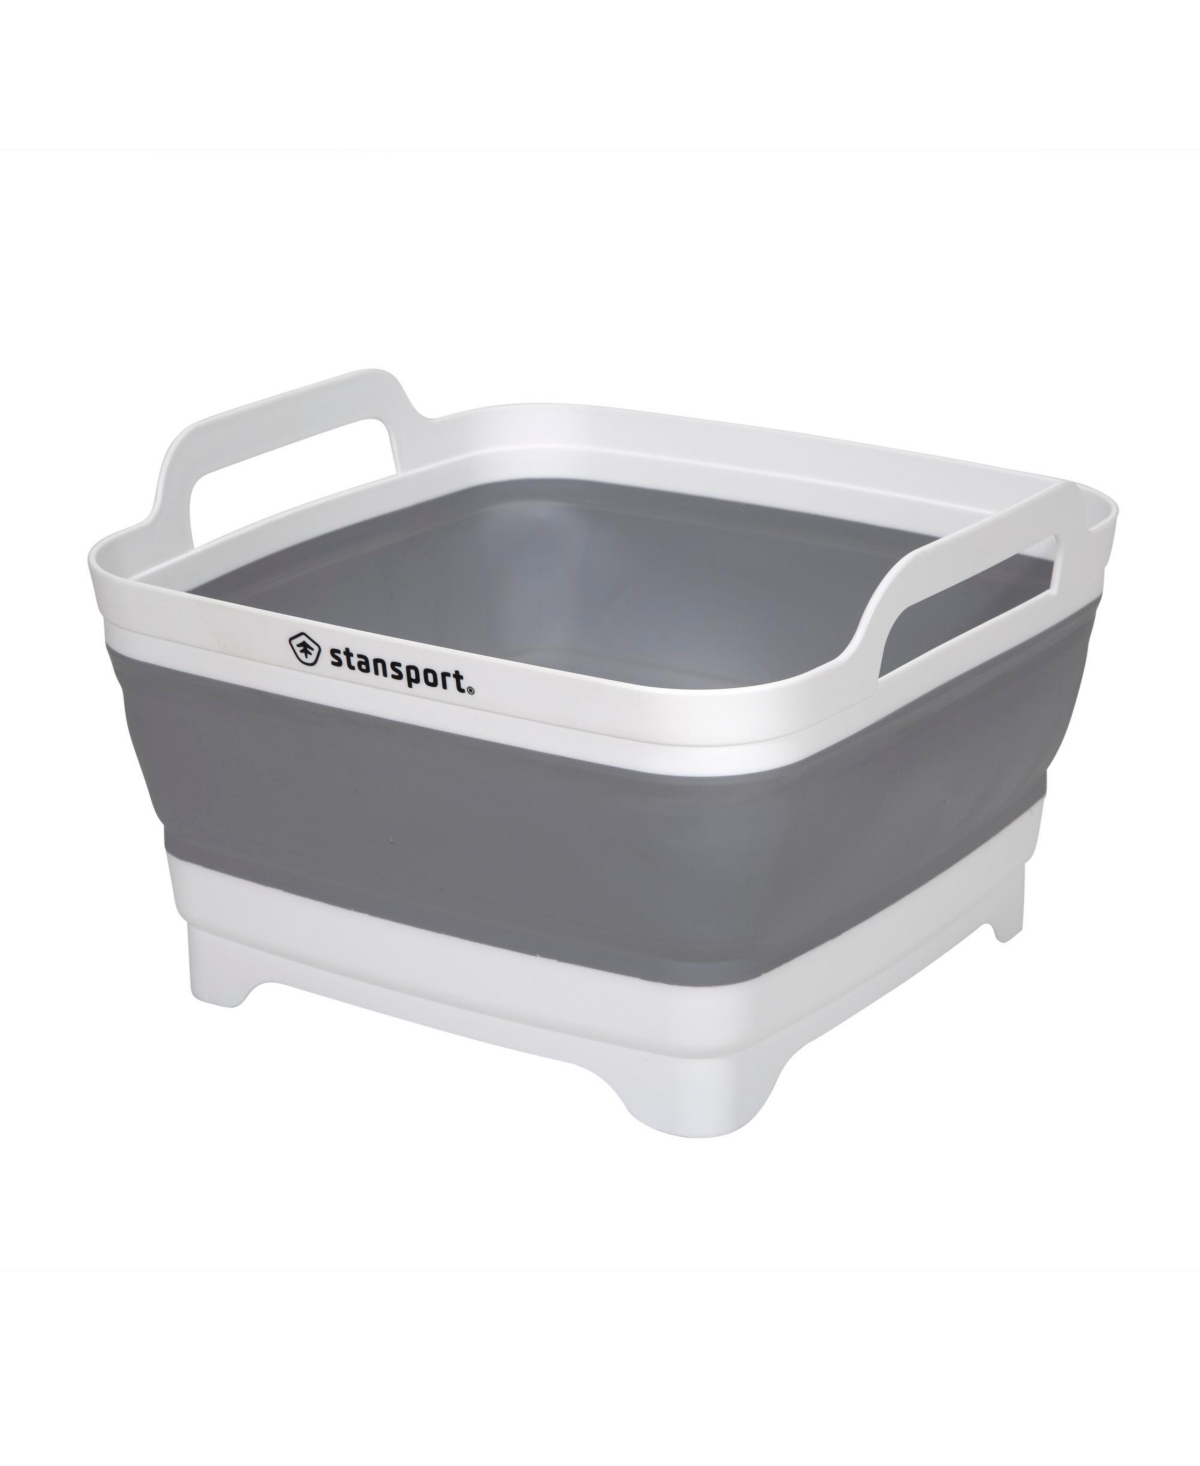 Stan sport Collapsible Camp Sink - White